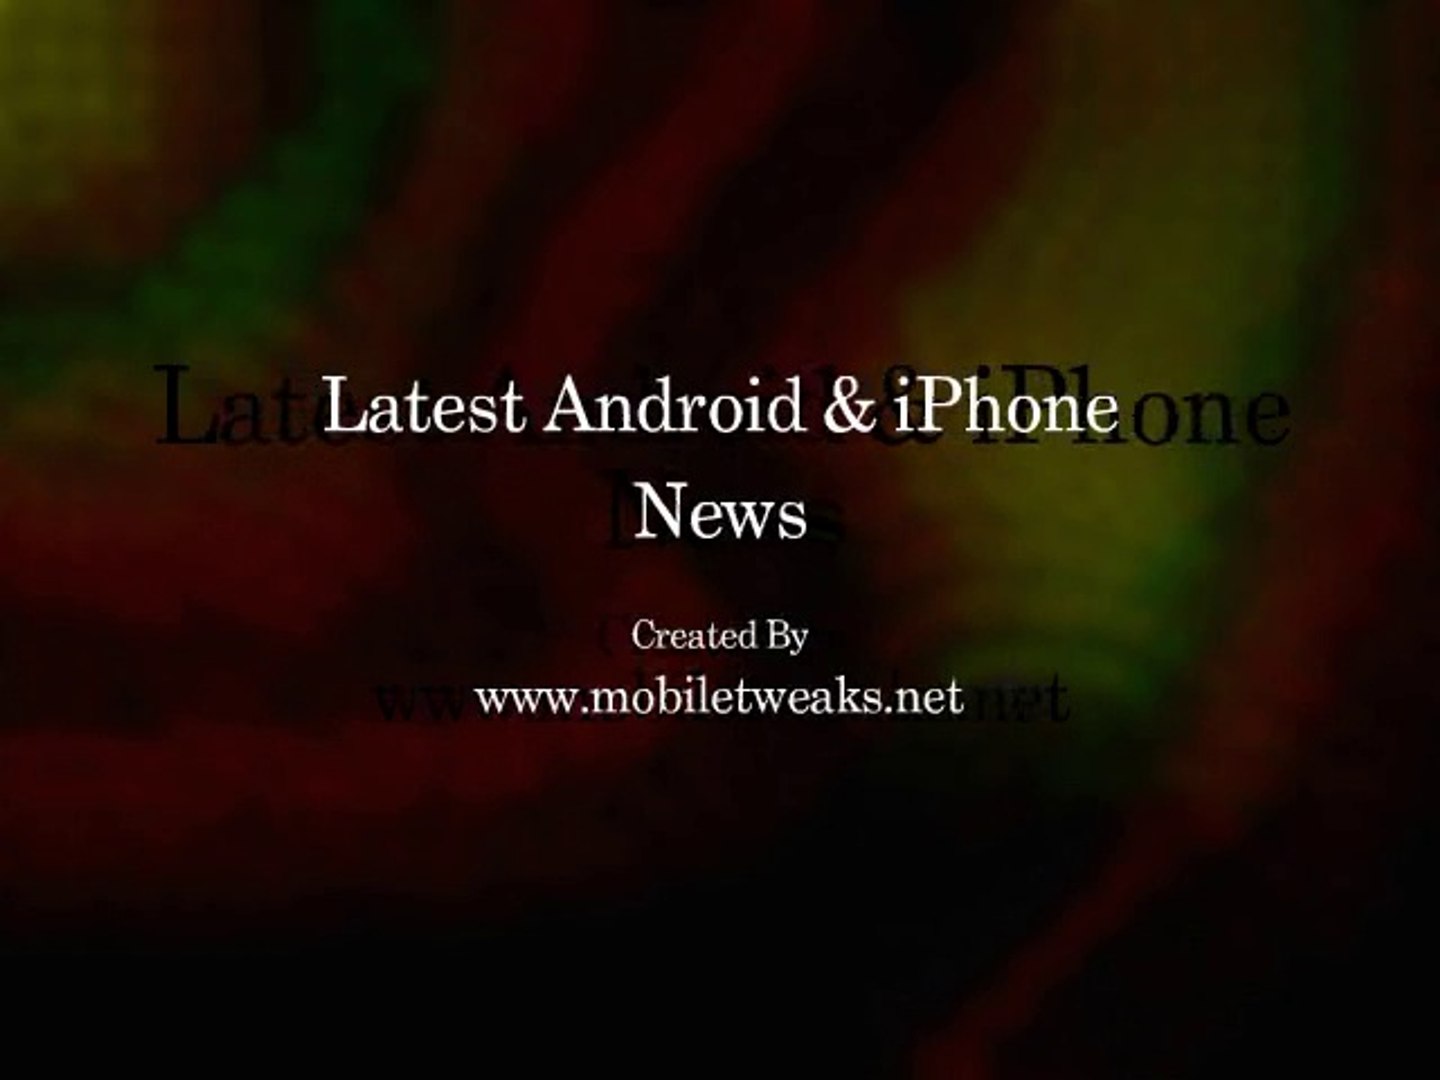 Latest Android & iPhone Tips Online. Latest Android & iPhone News.